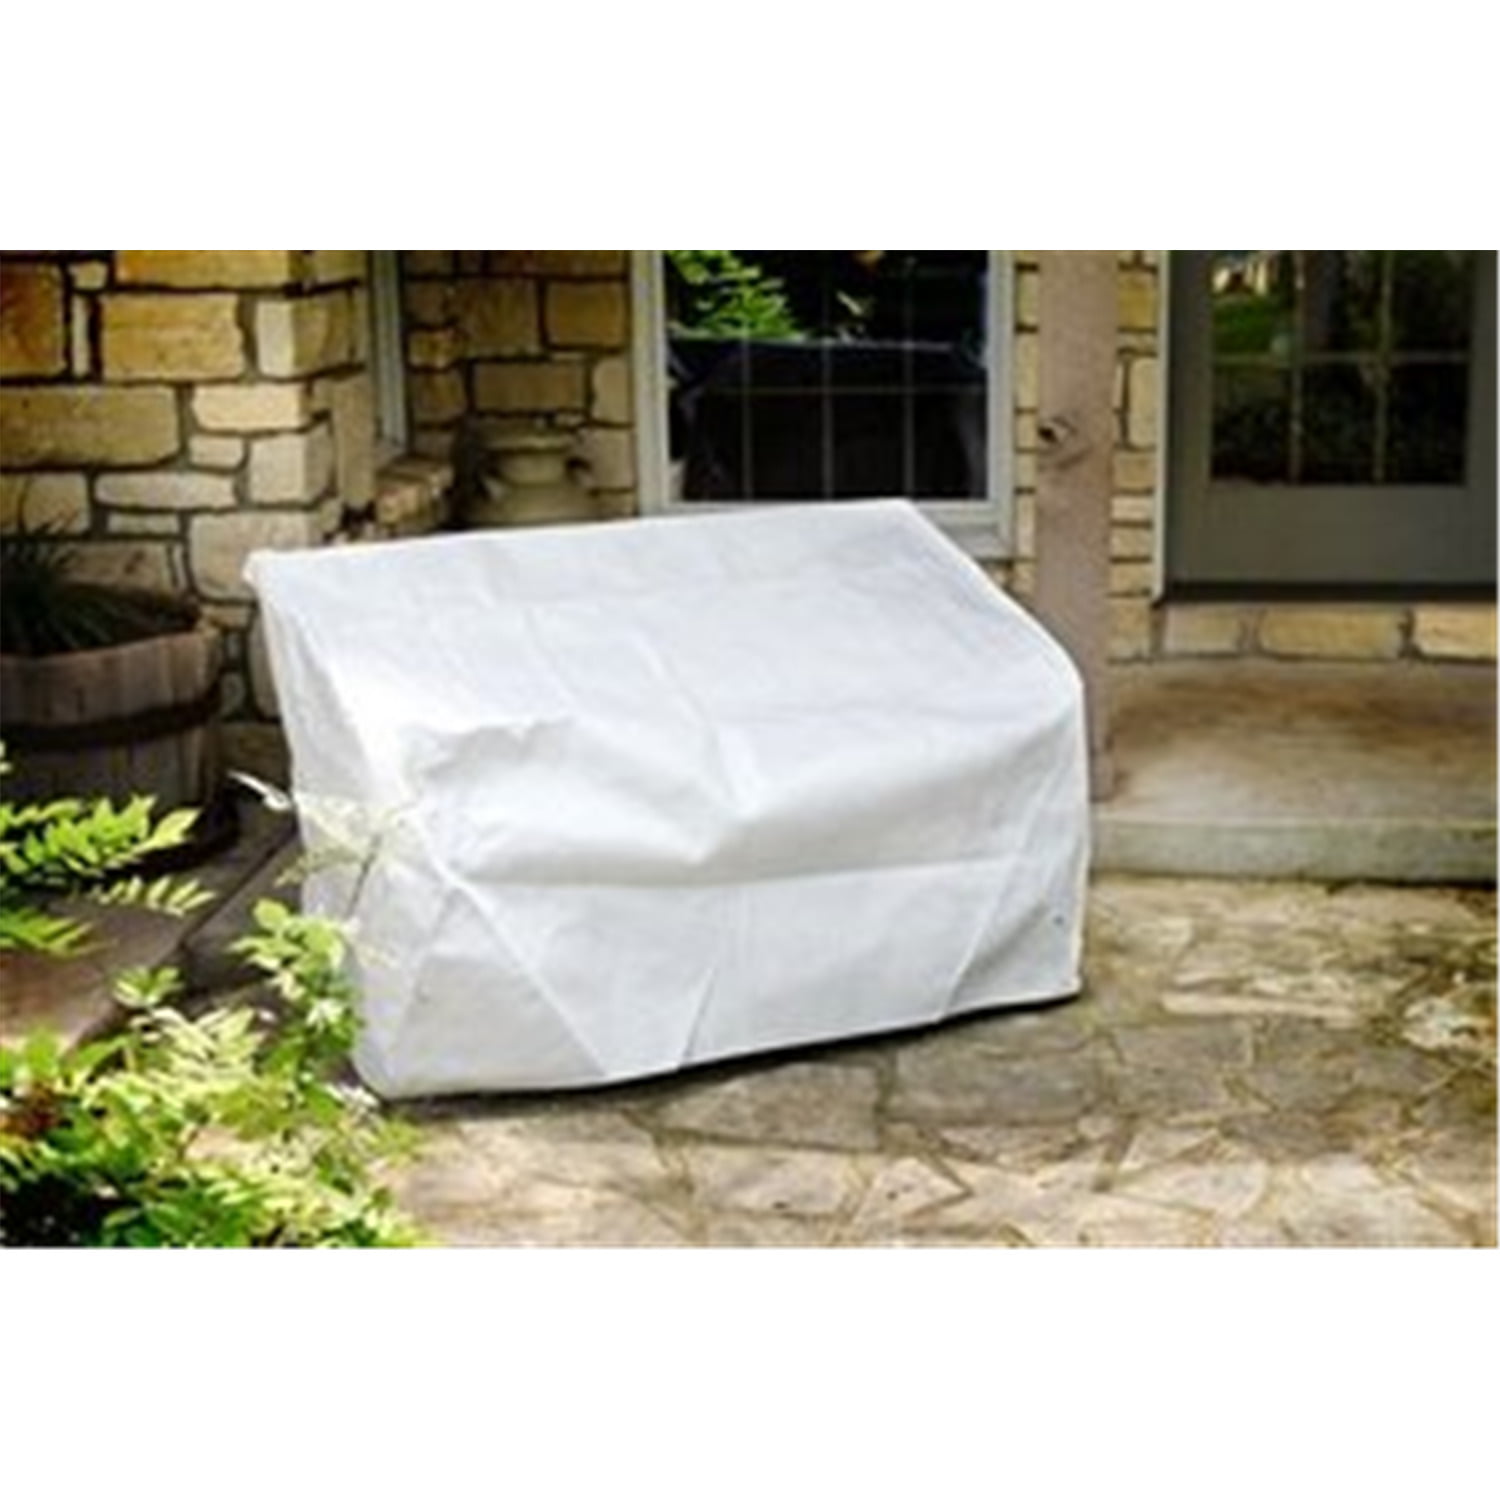 White KoverRoos DuPont Tyvek 29147 Loveseat/Sofa Cover 51-Inch Width by 33-Inch Diameter by 33-Inch Height 